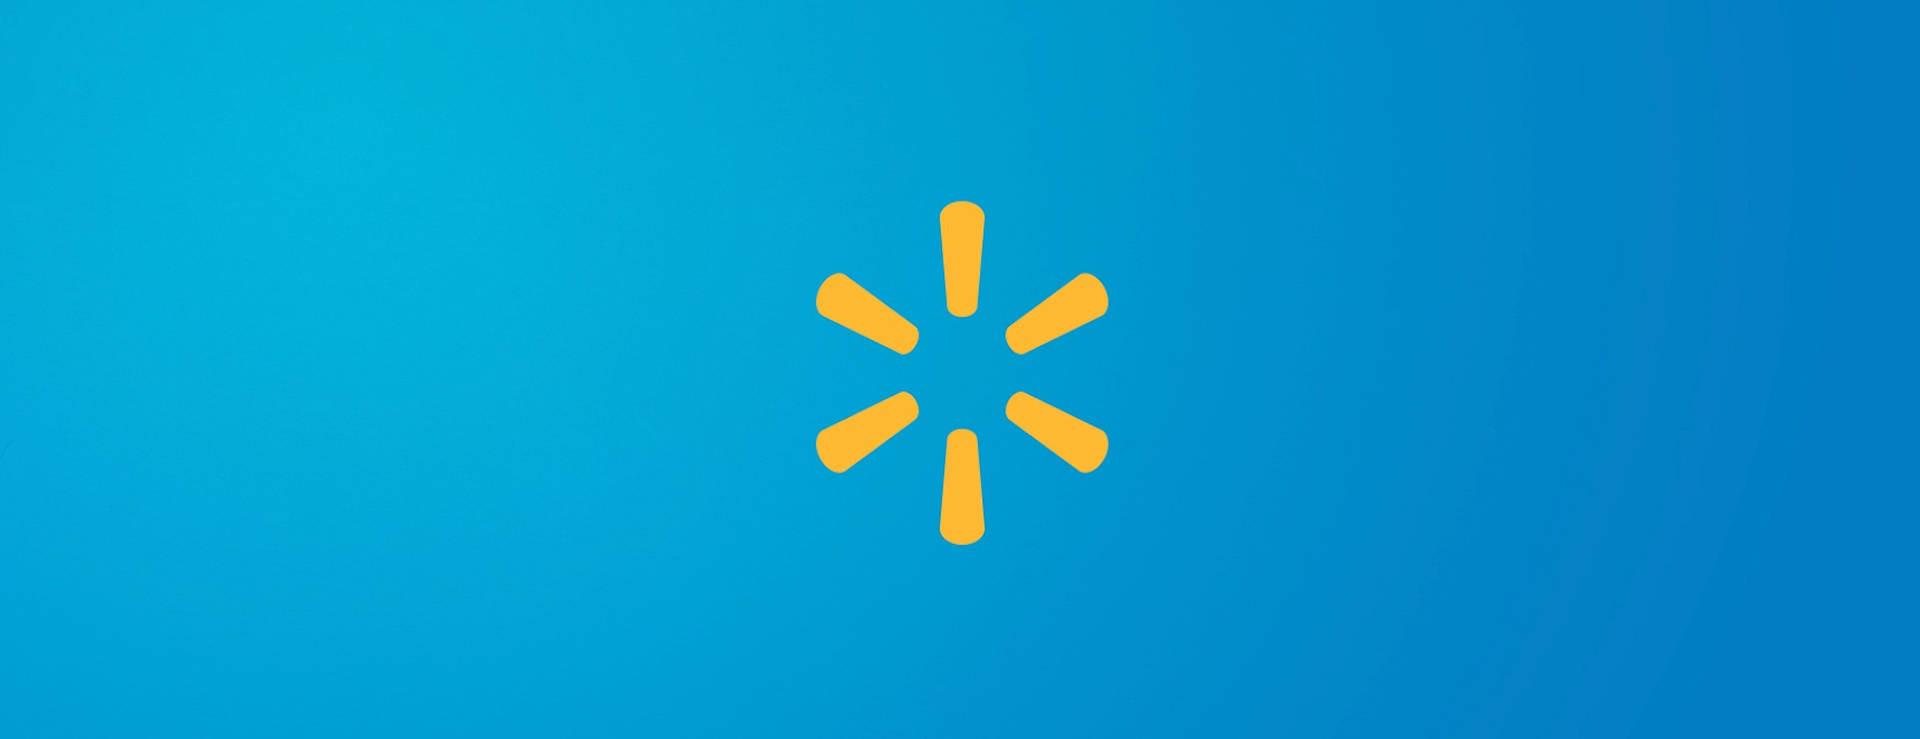 Walmart 2454X944 Wallpaper and Background Image